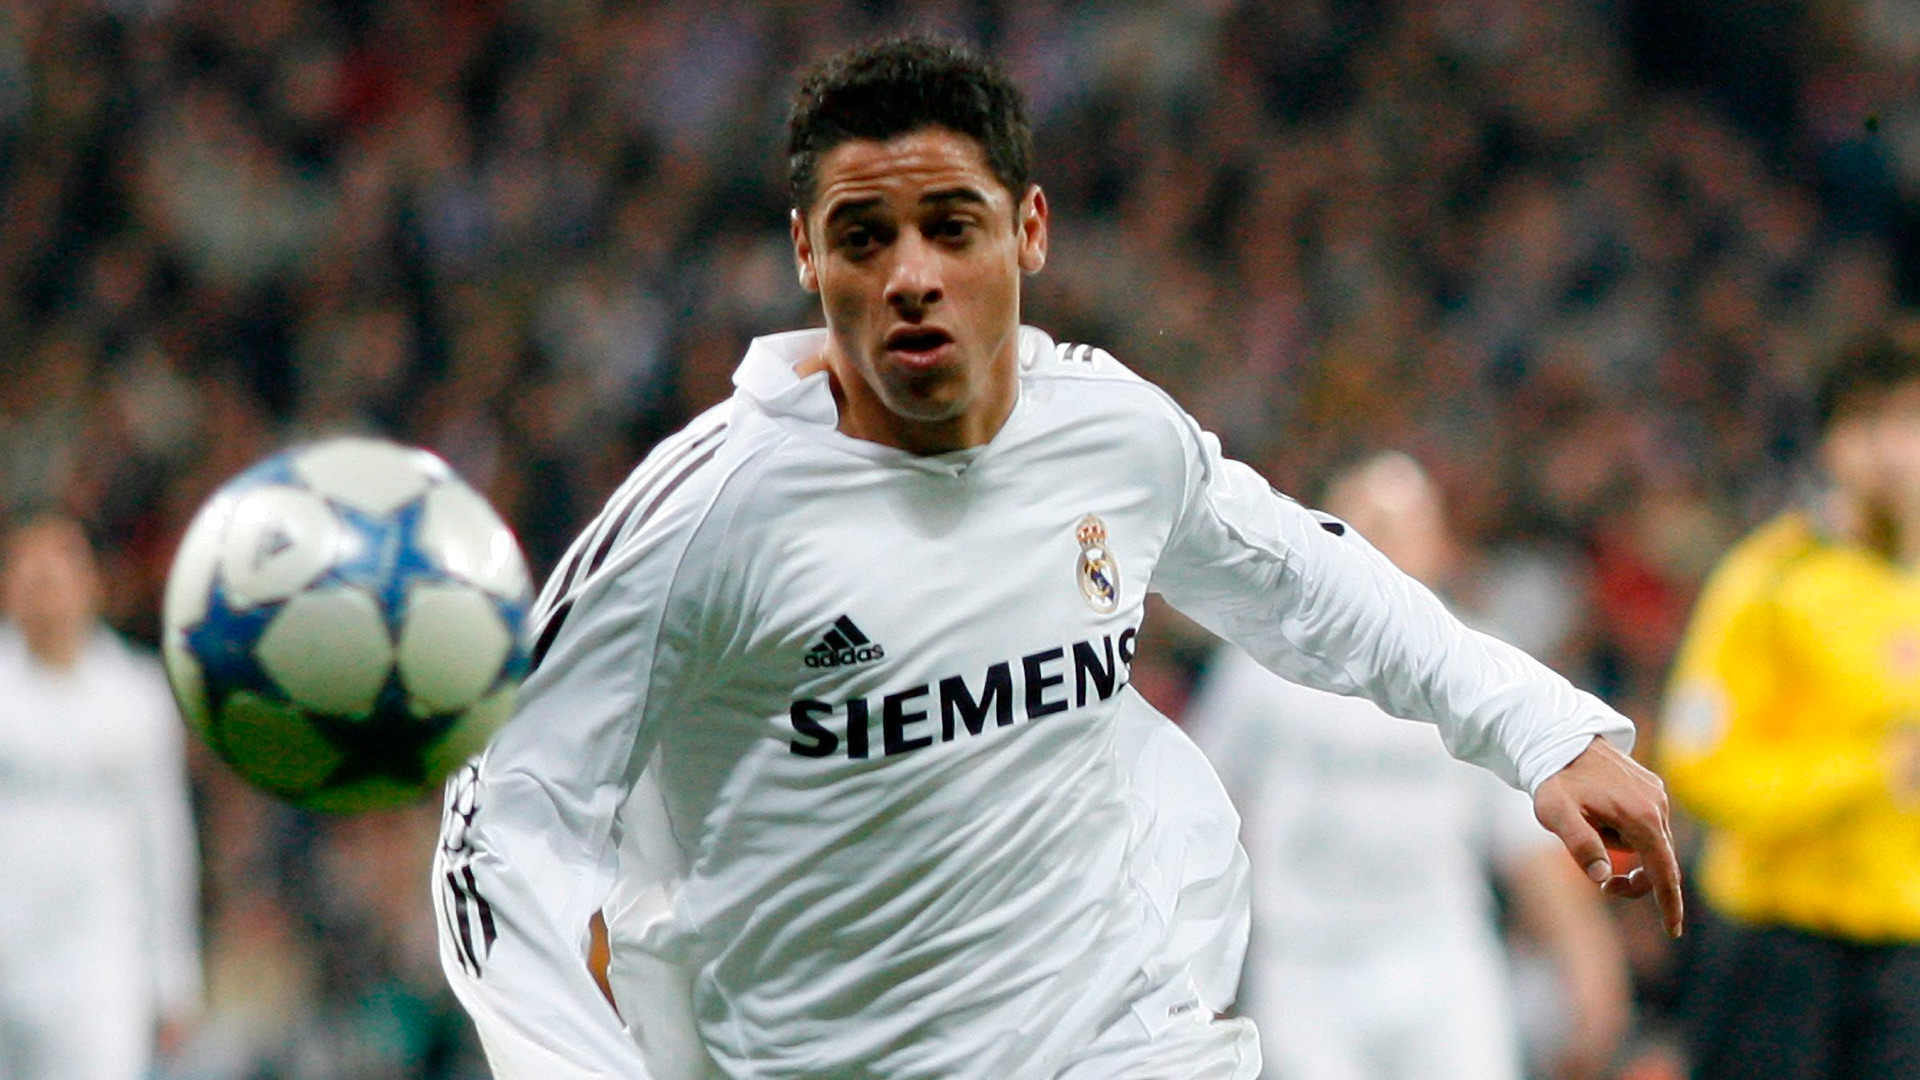 Cicinho played two seasons at Real Madrid (Shutterstock)